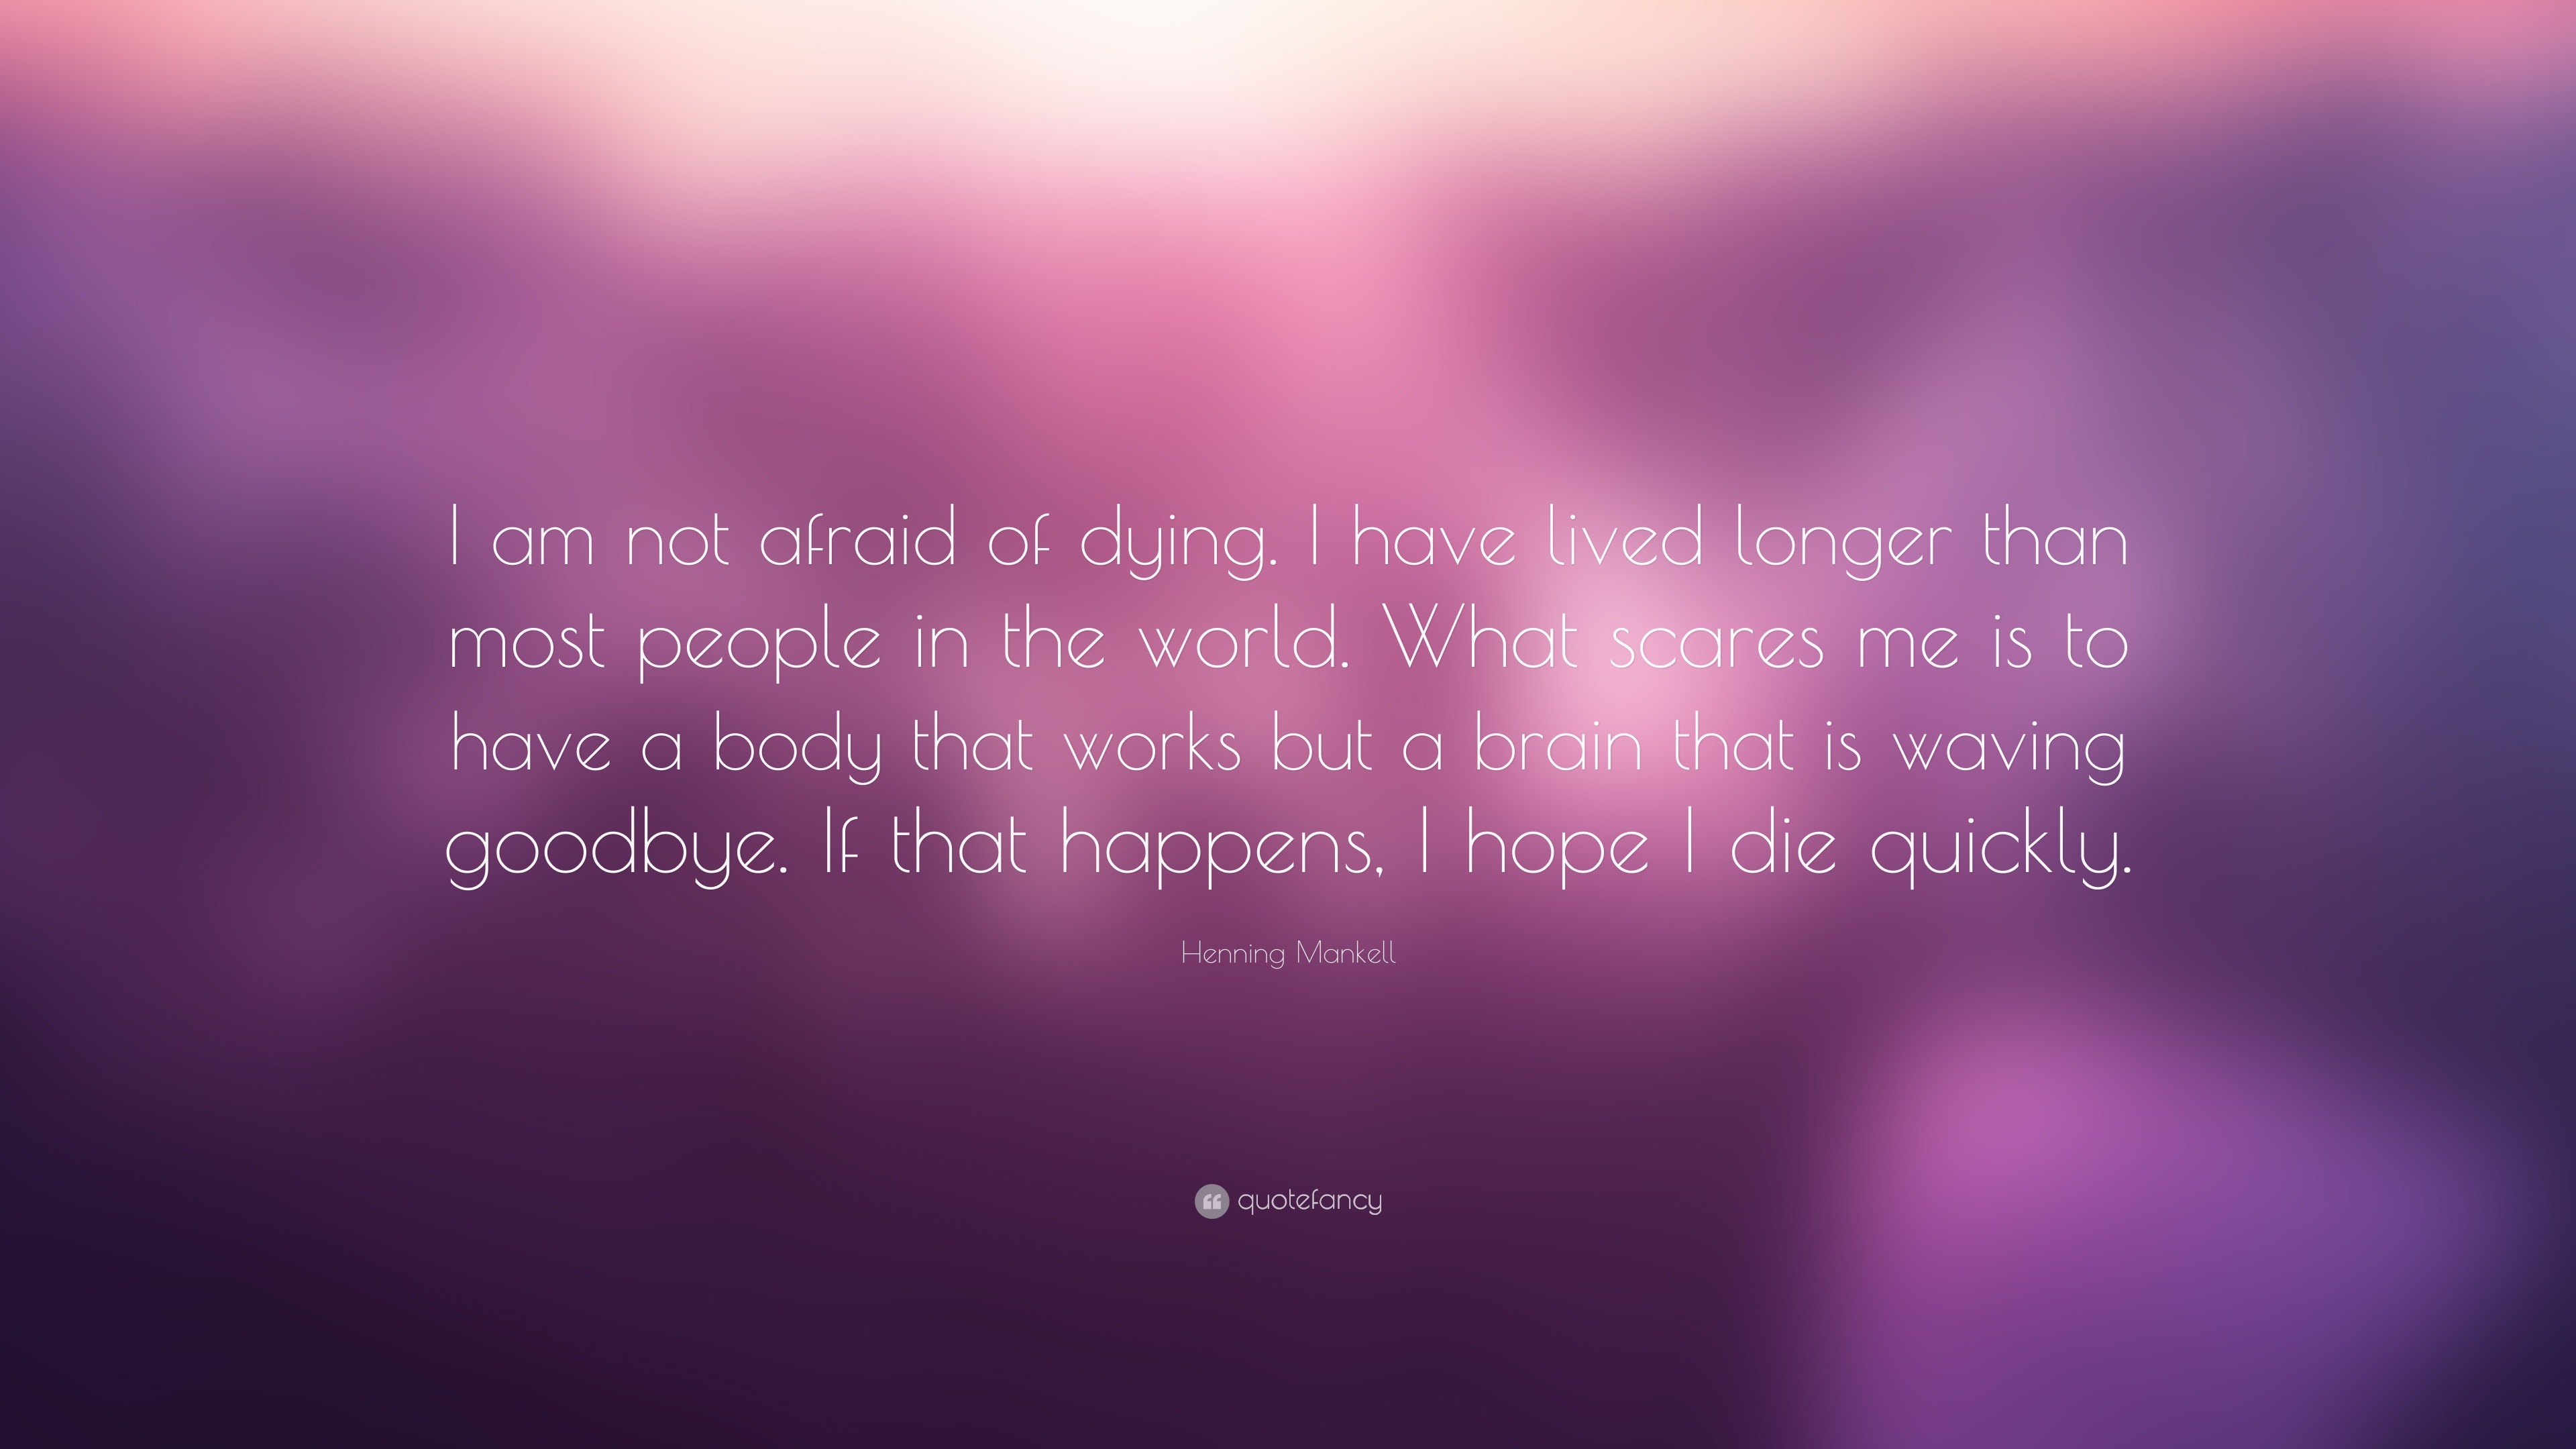 Henning Mankell Quote: “I am not afraid of dying. I have lived longer ...